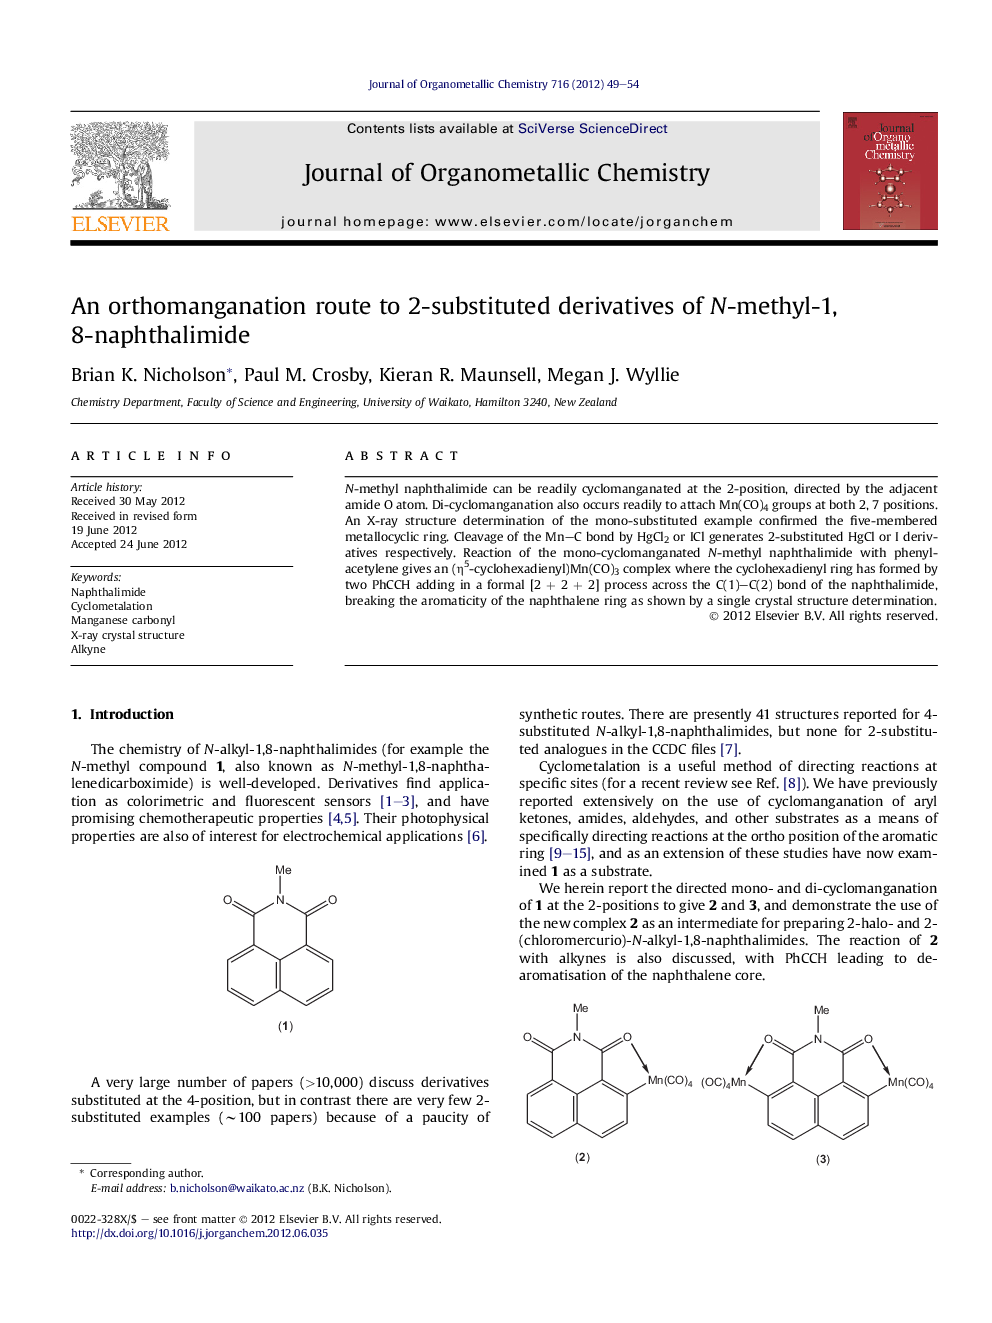 An orthomanganation route to 2-substituted derivatives of N-methyl-1,8-naphthalimide